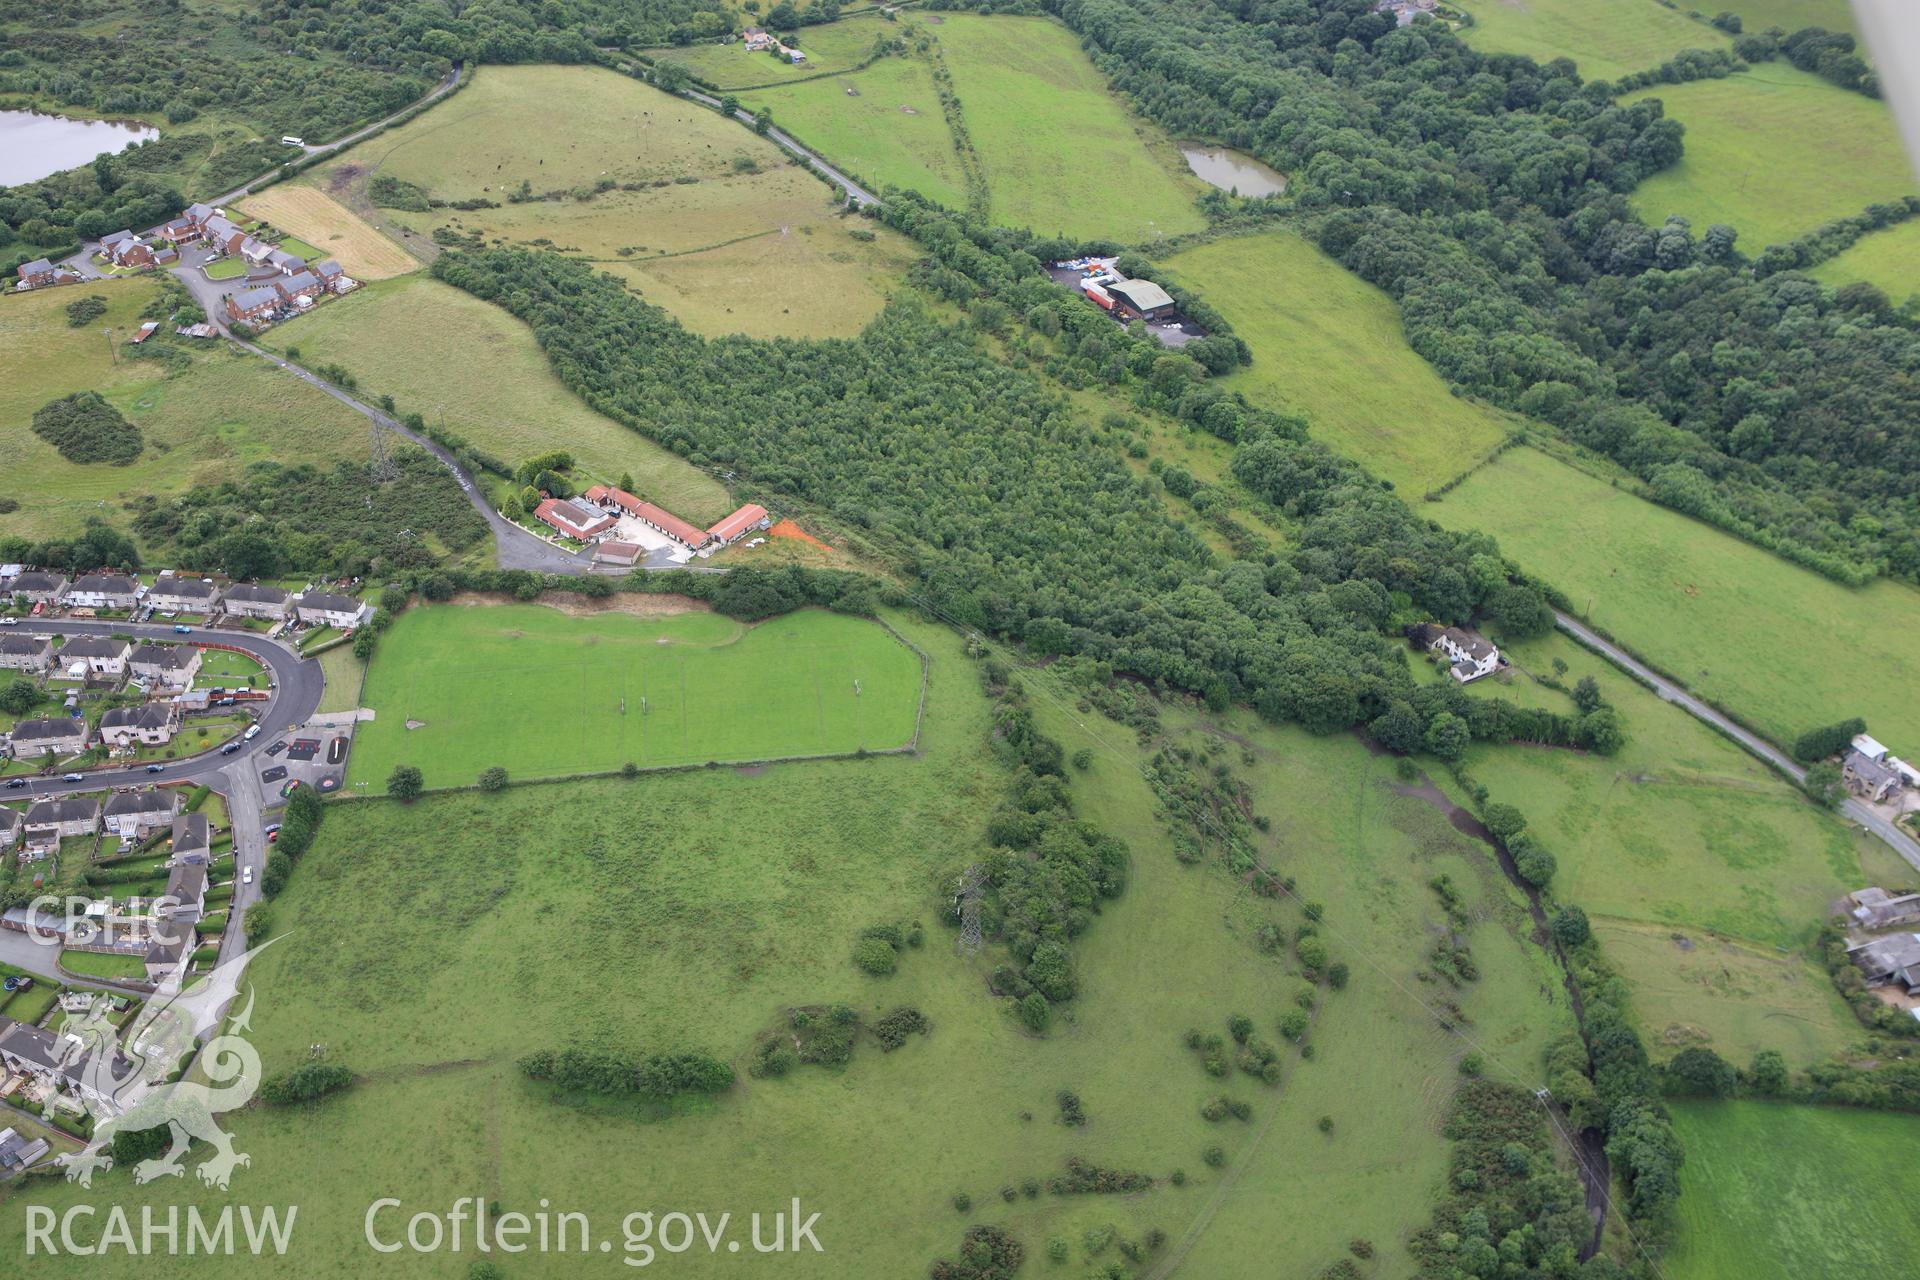 RCAHMW colour oblique aerial photograph of Offa's Dyke. Taken on 08 July 2009 by Toby Driver